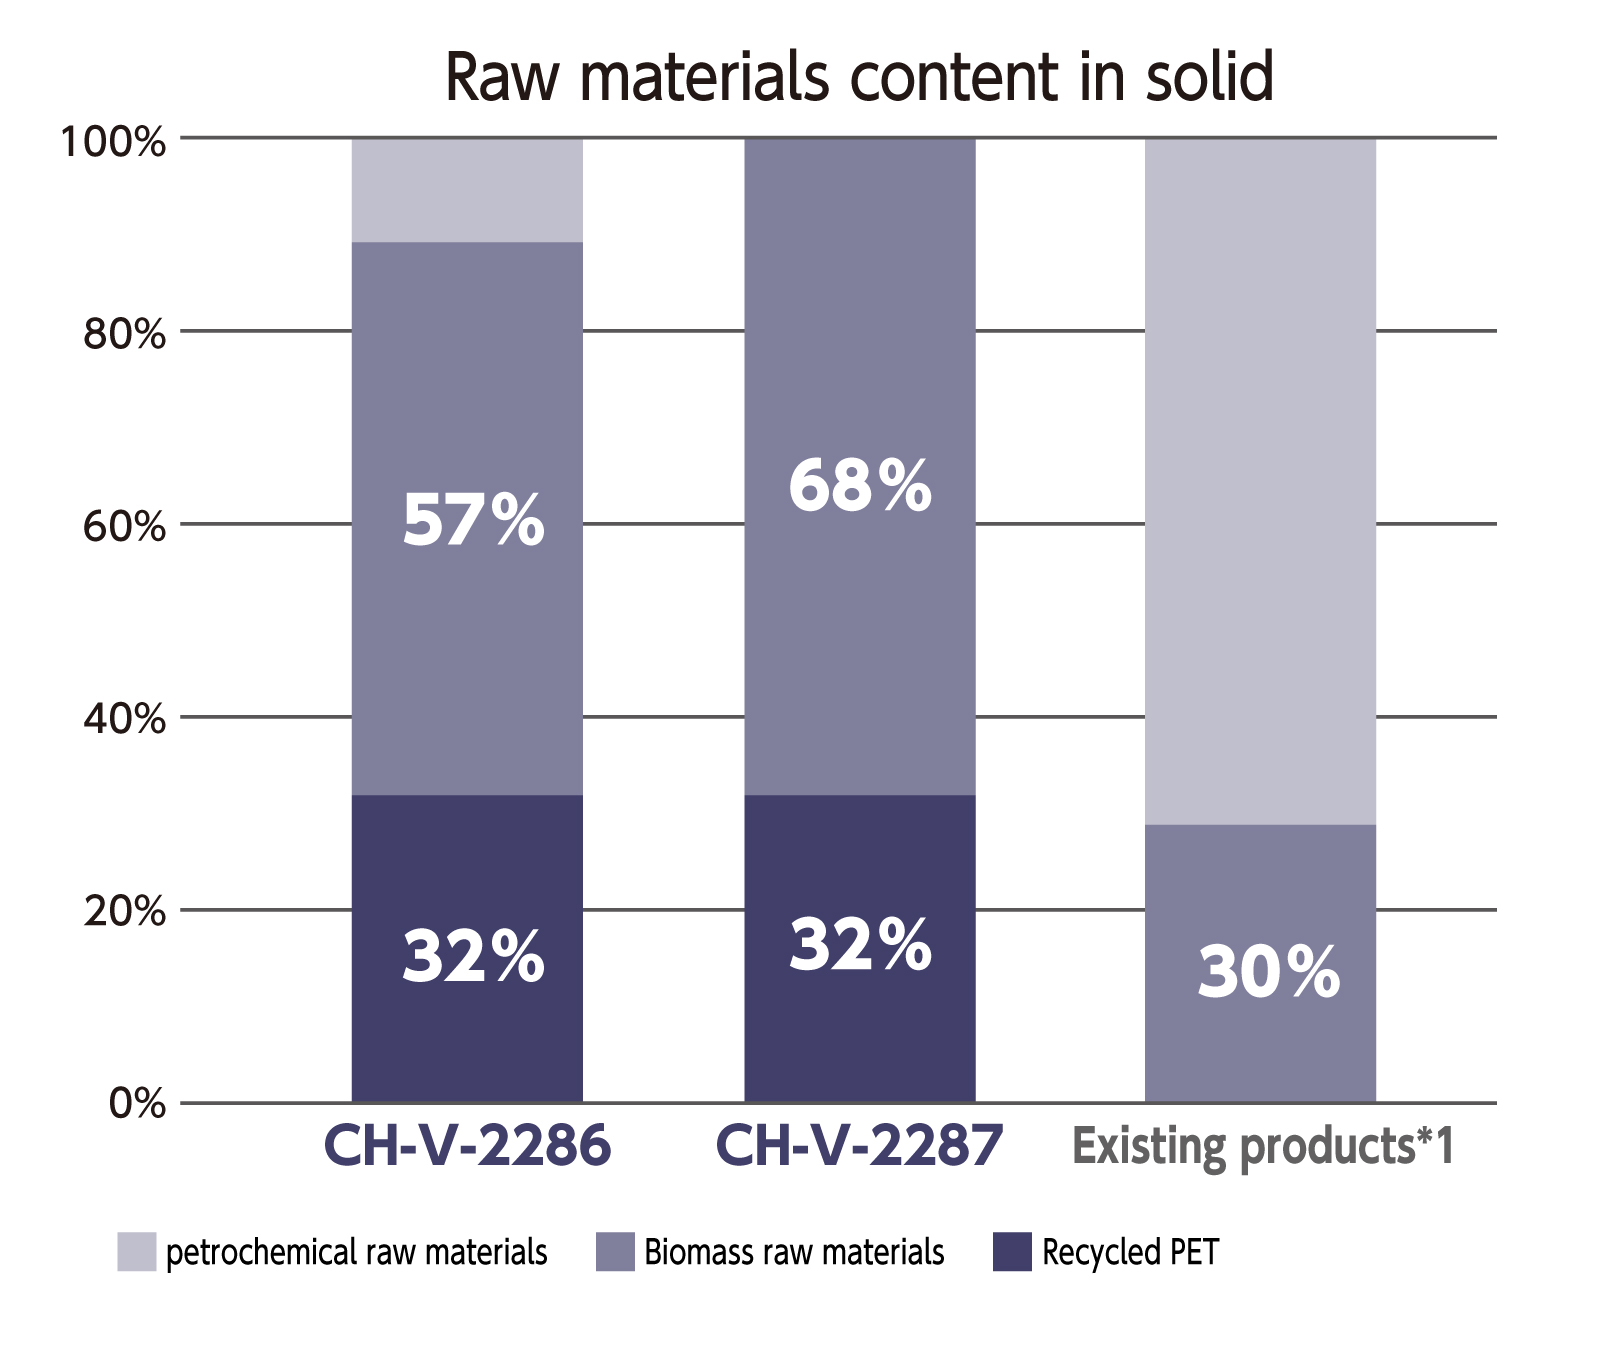 Significantly reduced use of petrochemical raw materials